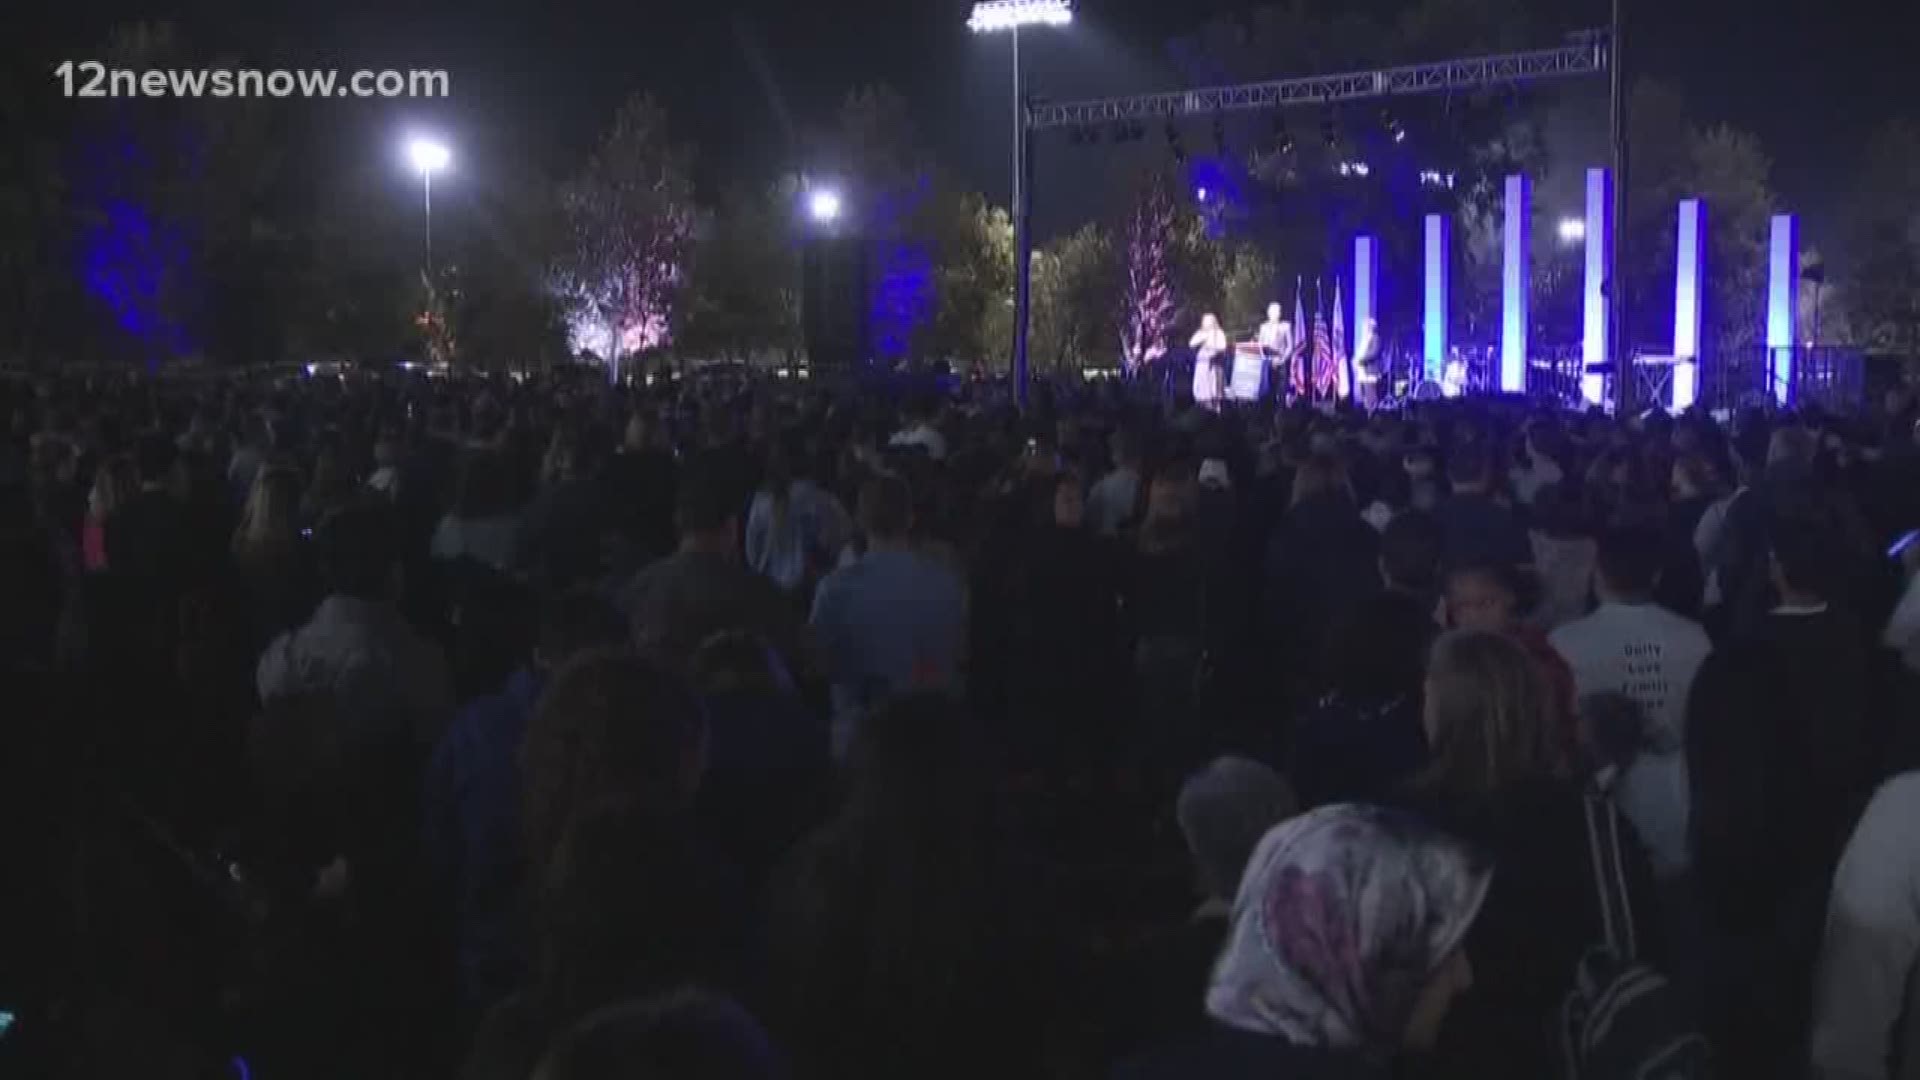 Thousands gathered last night to remember and reflect on last week's shooting at Saugus High School. Family members, students and school officials spoke to the crowd